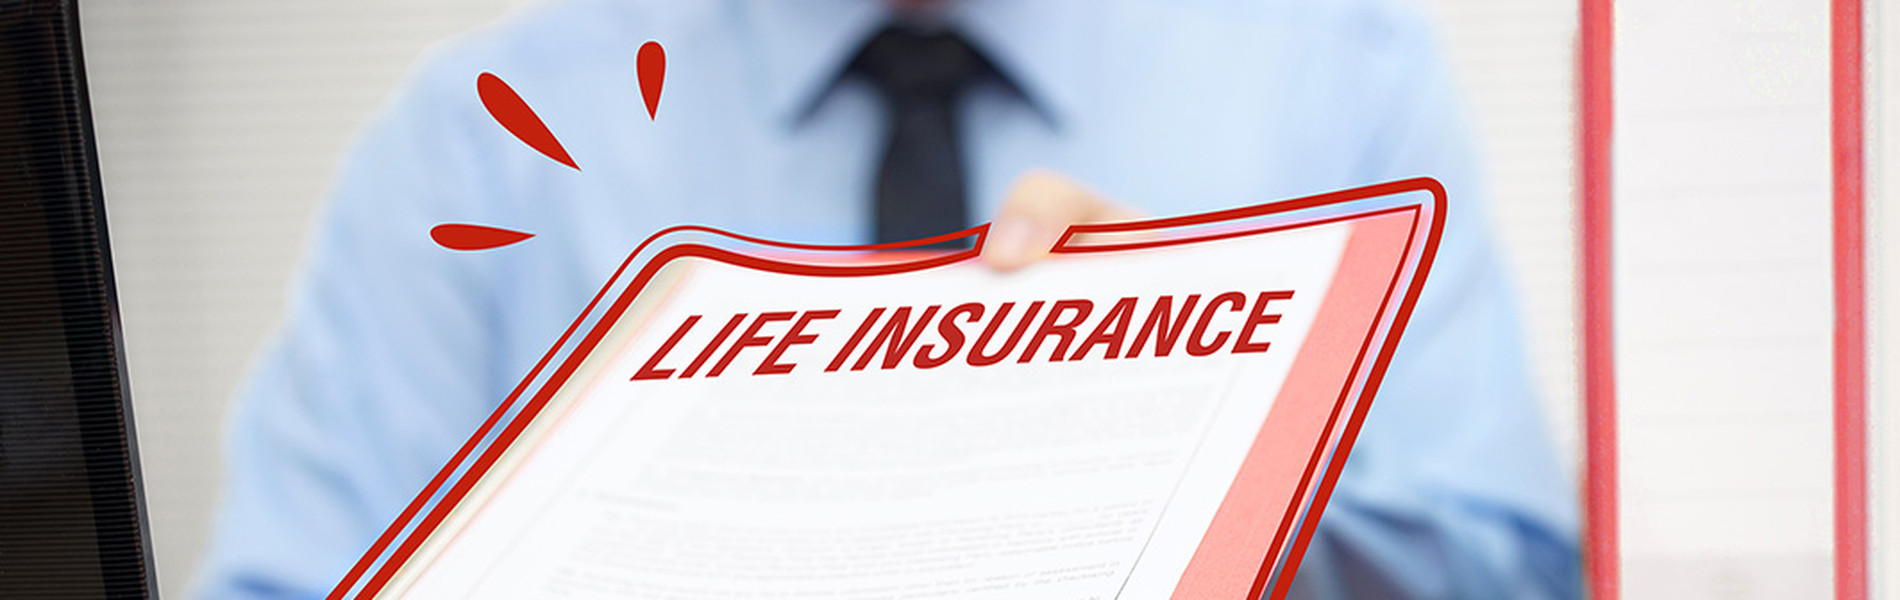 What is life insurance, and why do I need it_shutterstock_278780831_FINAL.jpg